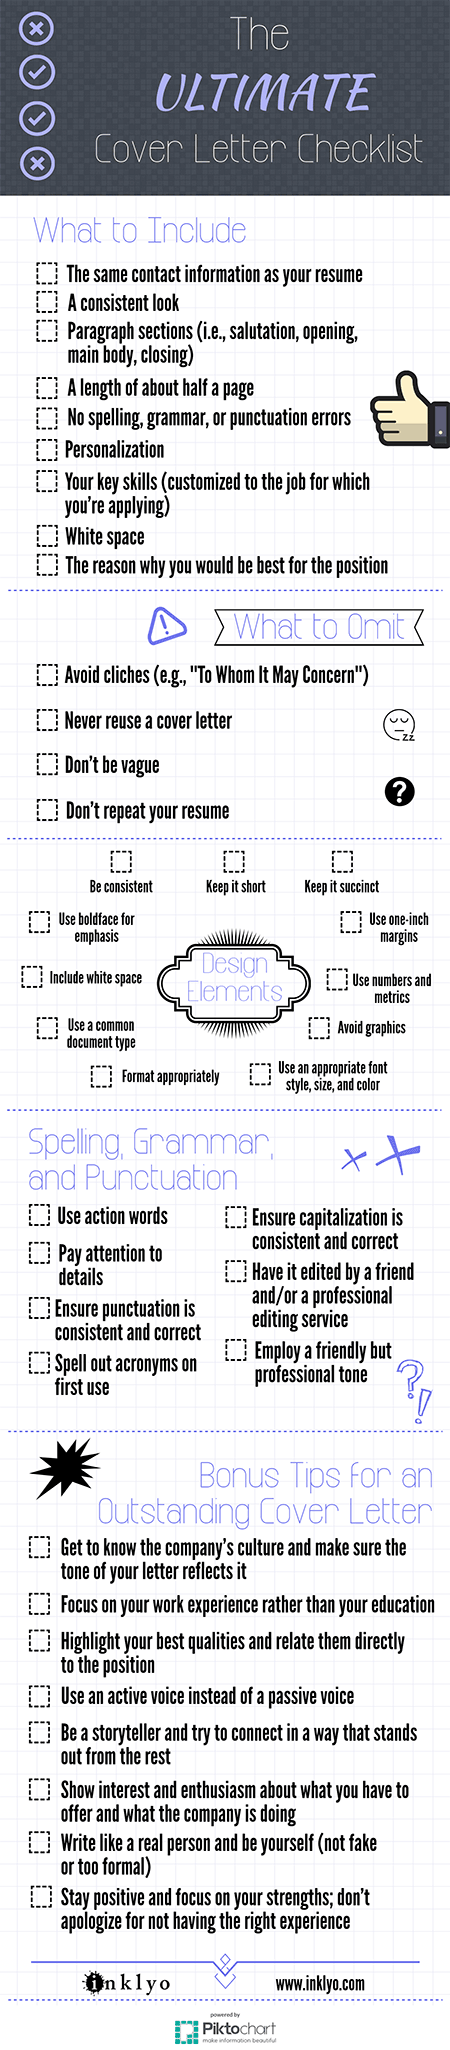 The Ultimate Cover Letter Checklist.